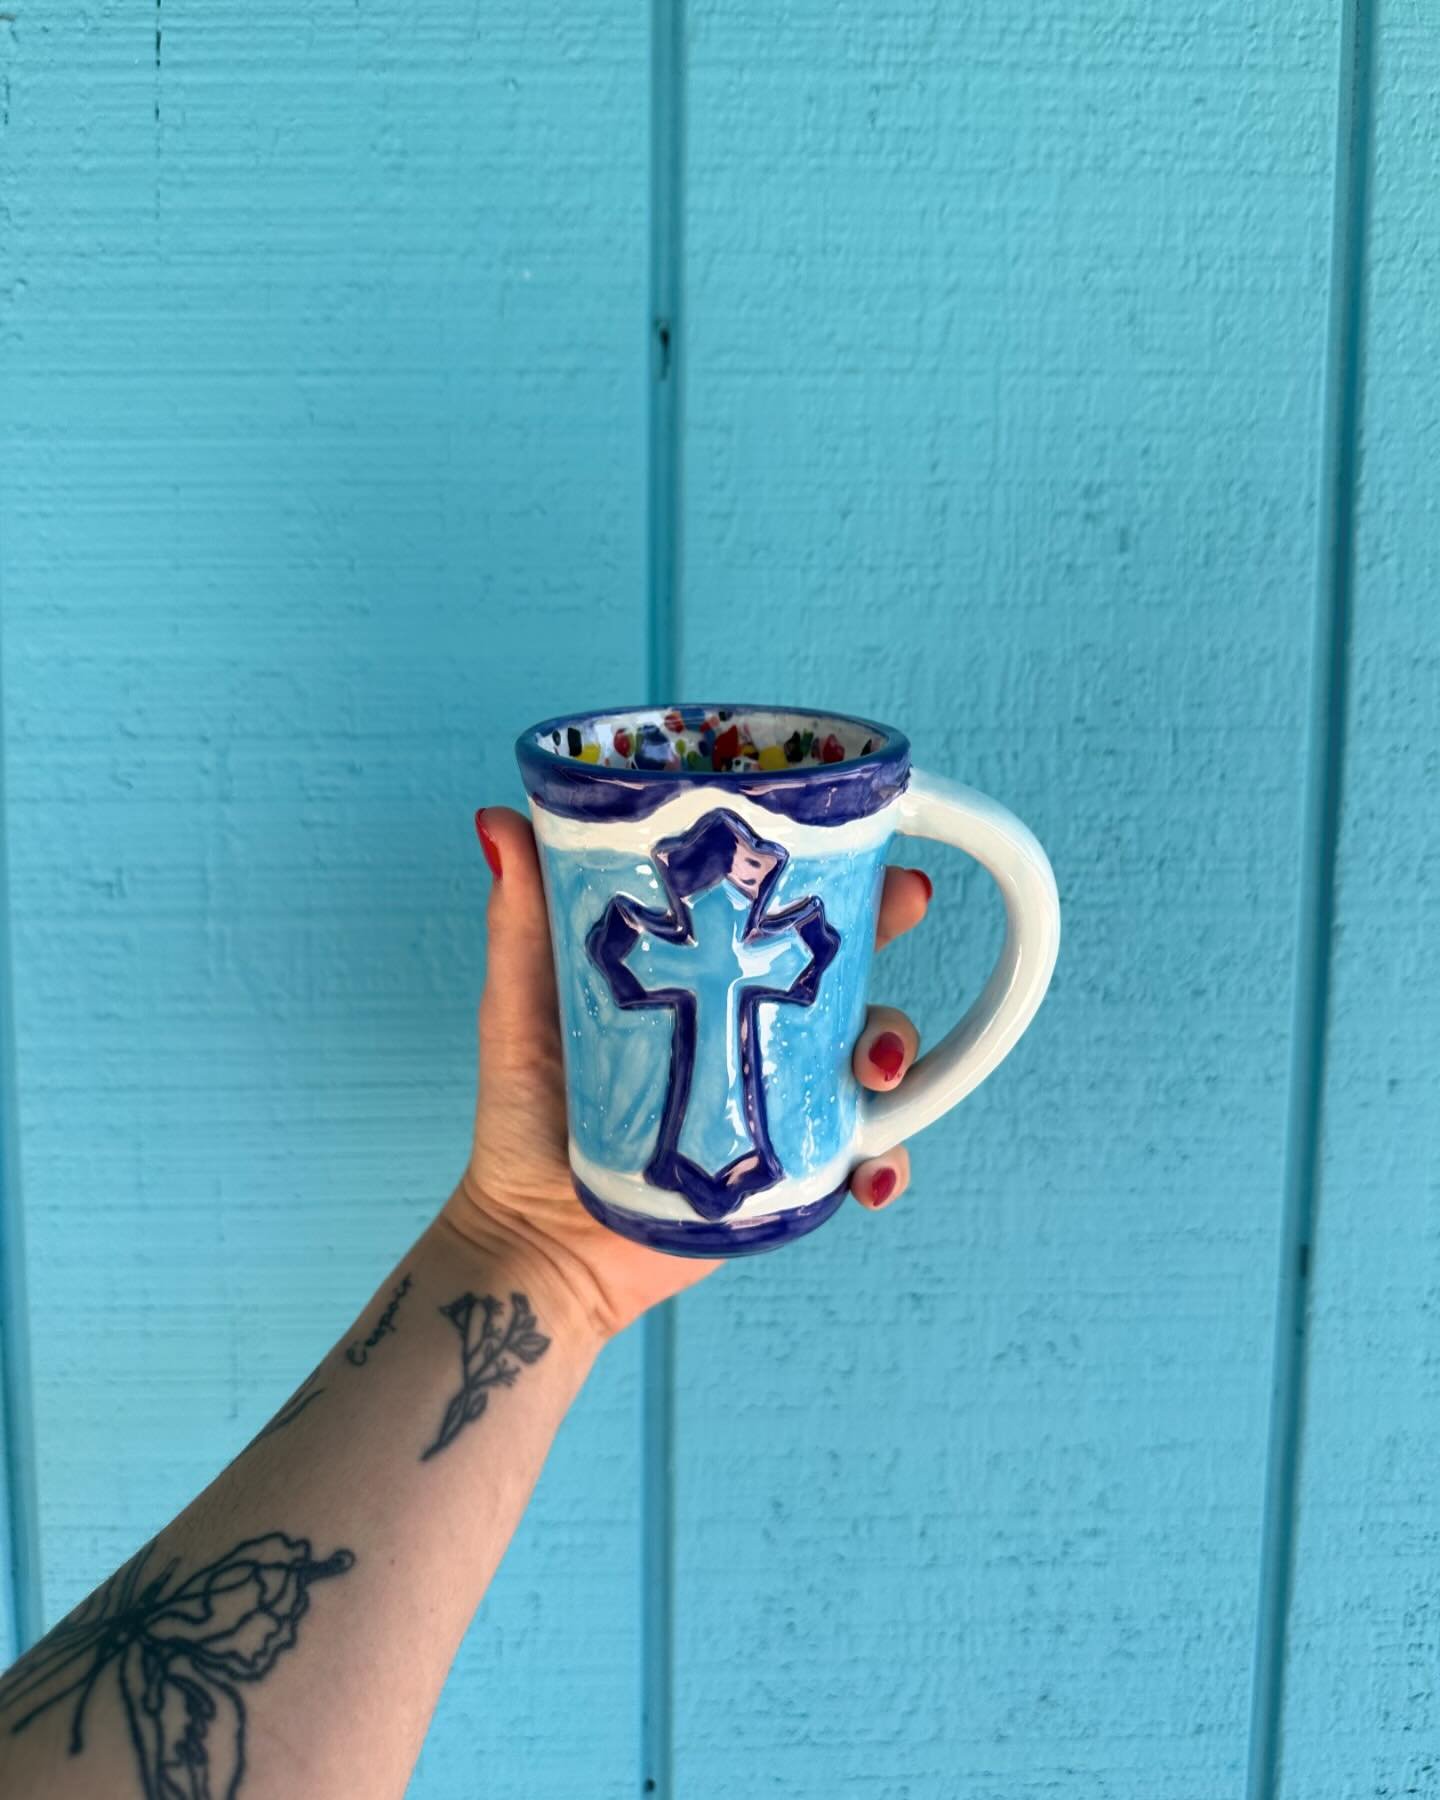 I know you were expecting it&hellip; kiln haul pt. 2648930485228 ☺️❤️✨

| family friendly art studio in Dawsonville, GA
| pottery,canvas, other arts and crafts 
| open Tue-Sat 12-7
| (706) 265-2738
| 31 Jack Heard Drive, Dawsonville, GA 30534
-
#pott